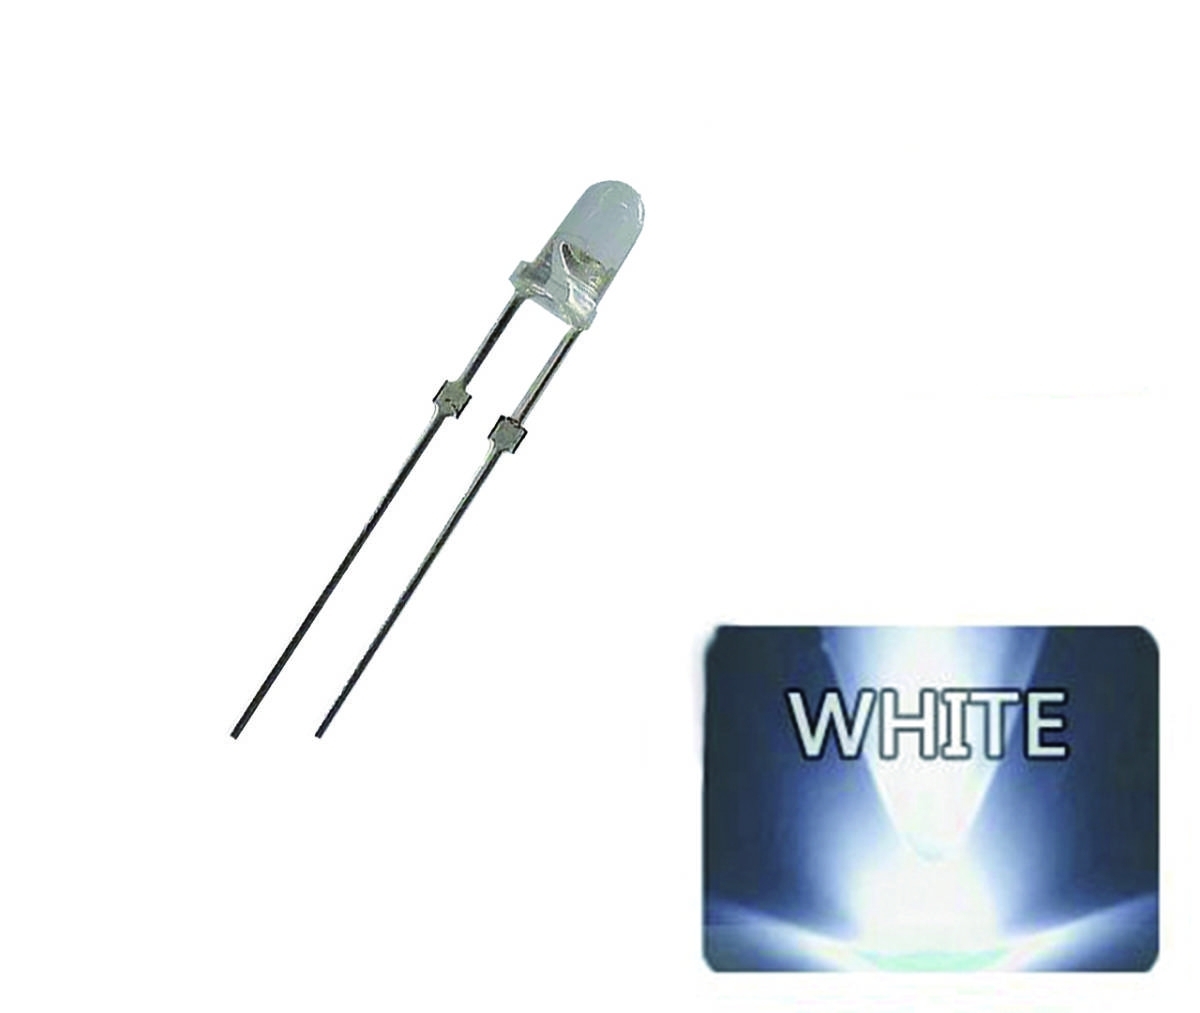 3mm cannonball type LED white color 20 piece set 